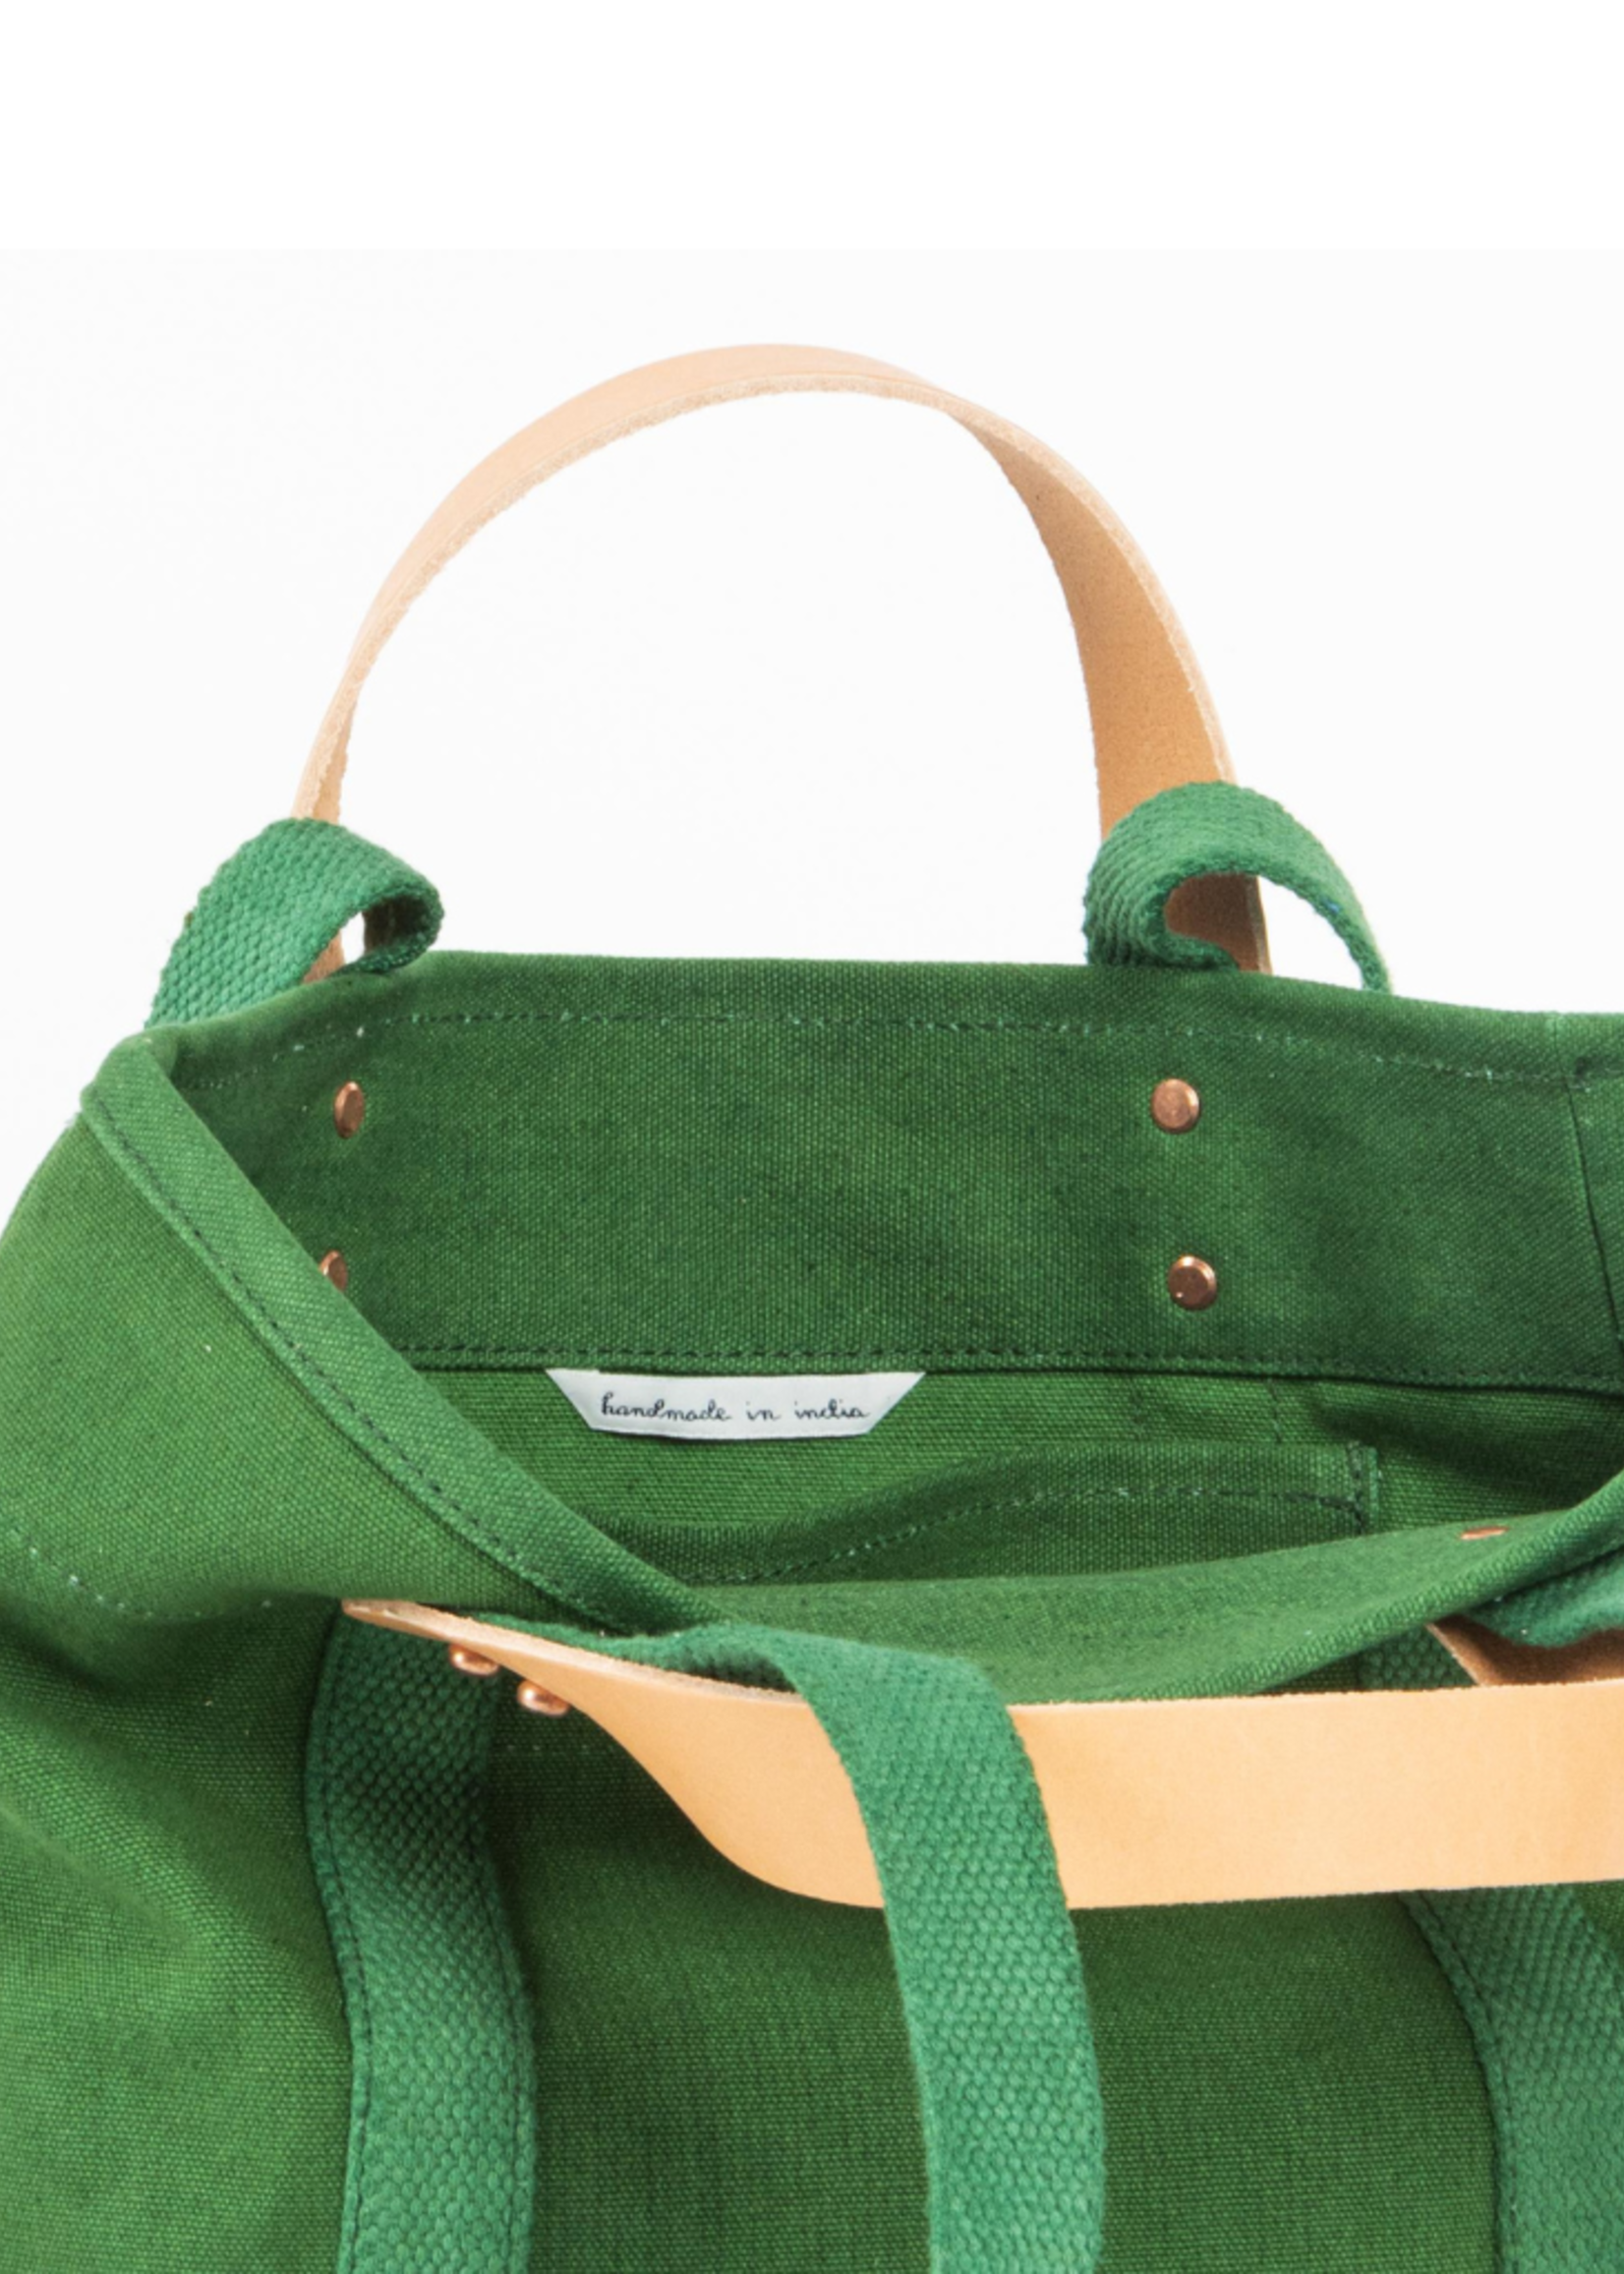 Immodest Cotton Immodest Cotton - Lunch Tote -Pine